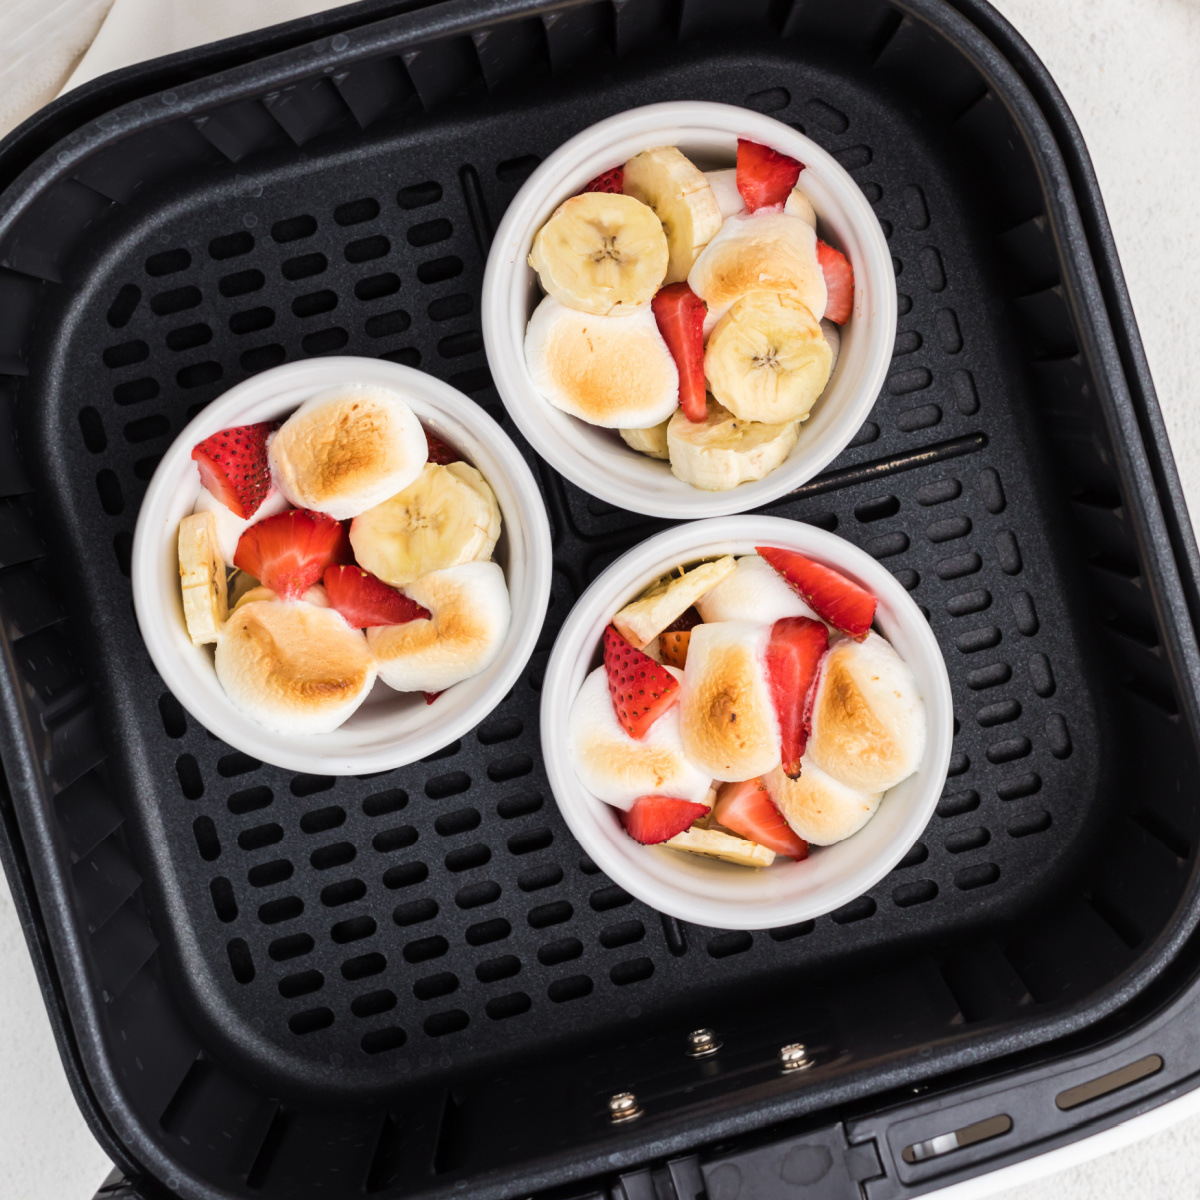 Strawberry Banana Bowls in the basket of the air fryer.